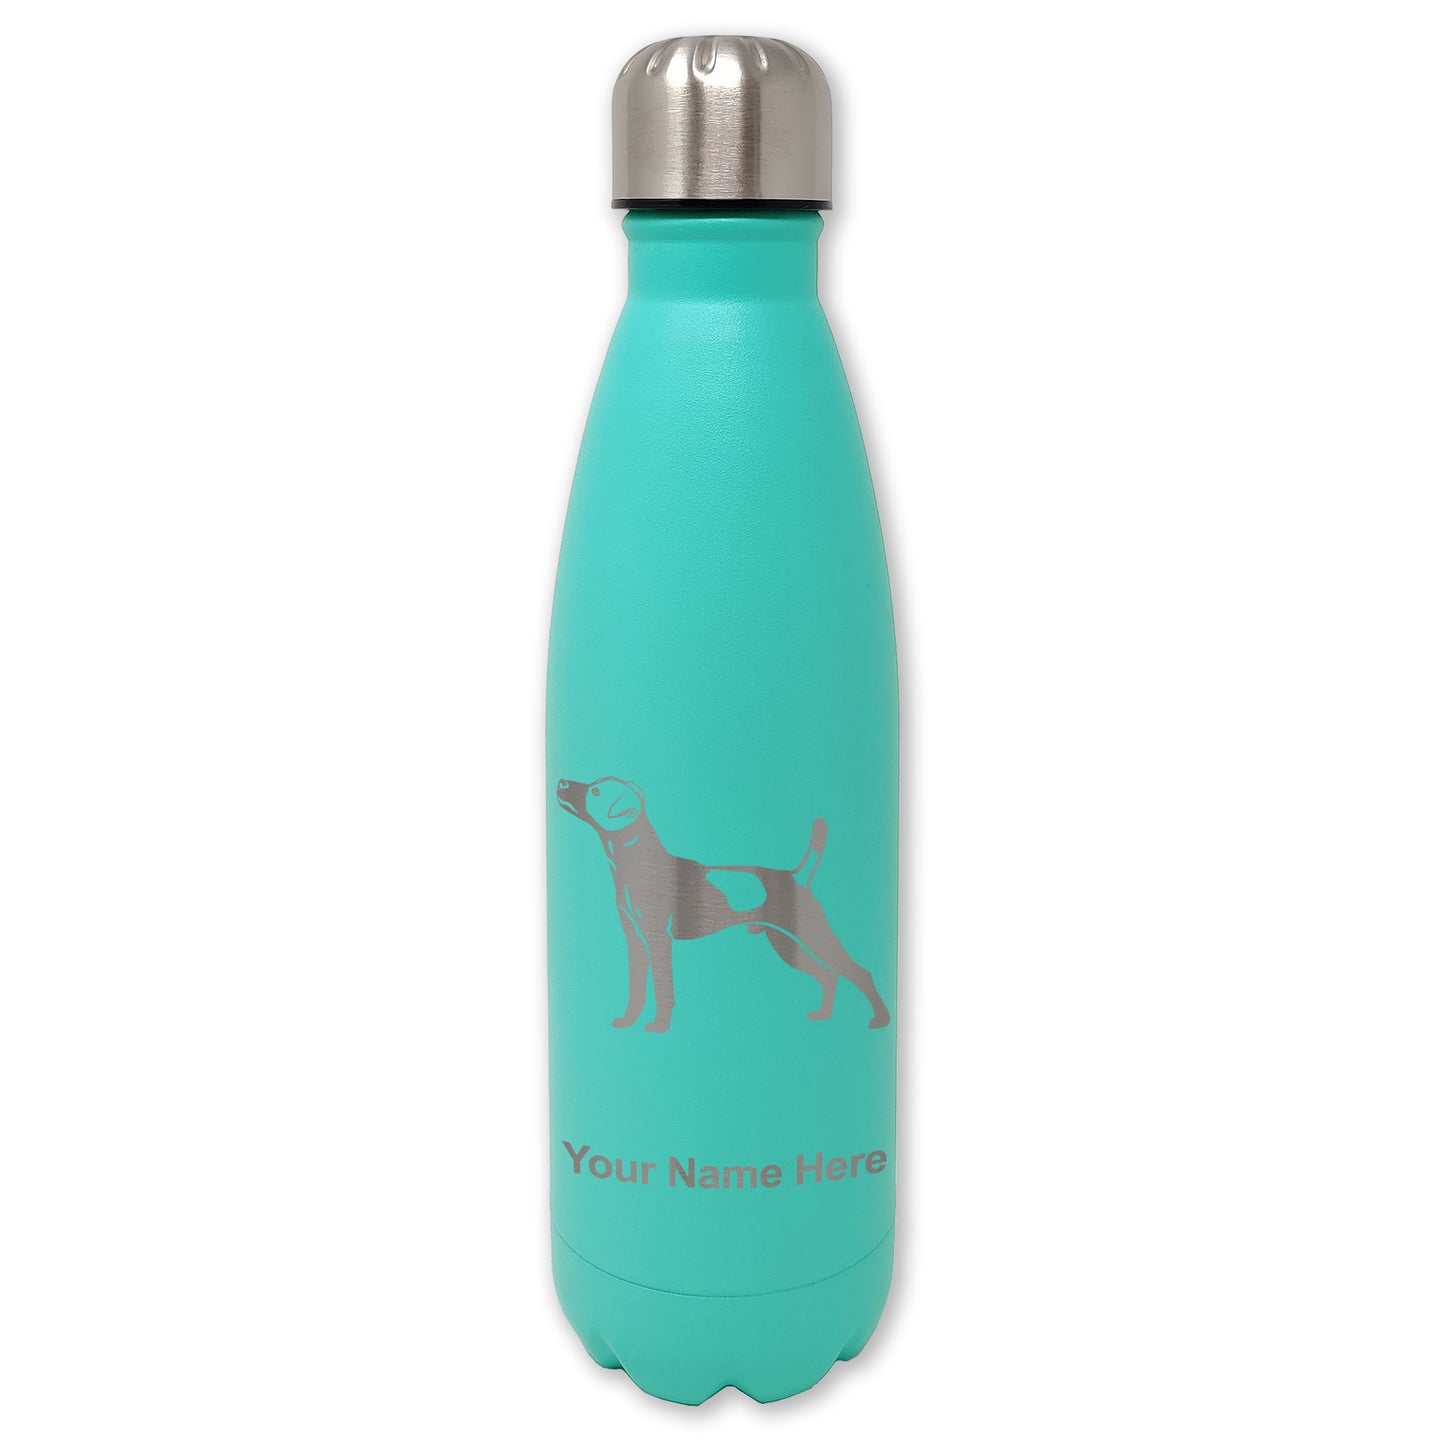 LaserGram Double Wall Water Bottle, Jack Russell Terrier Dog, Personalized Engraving Included